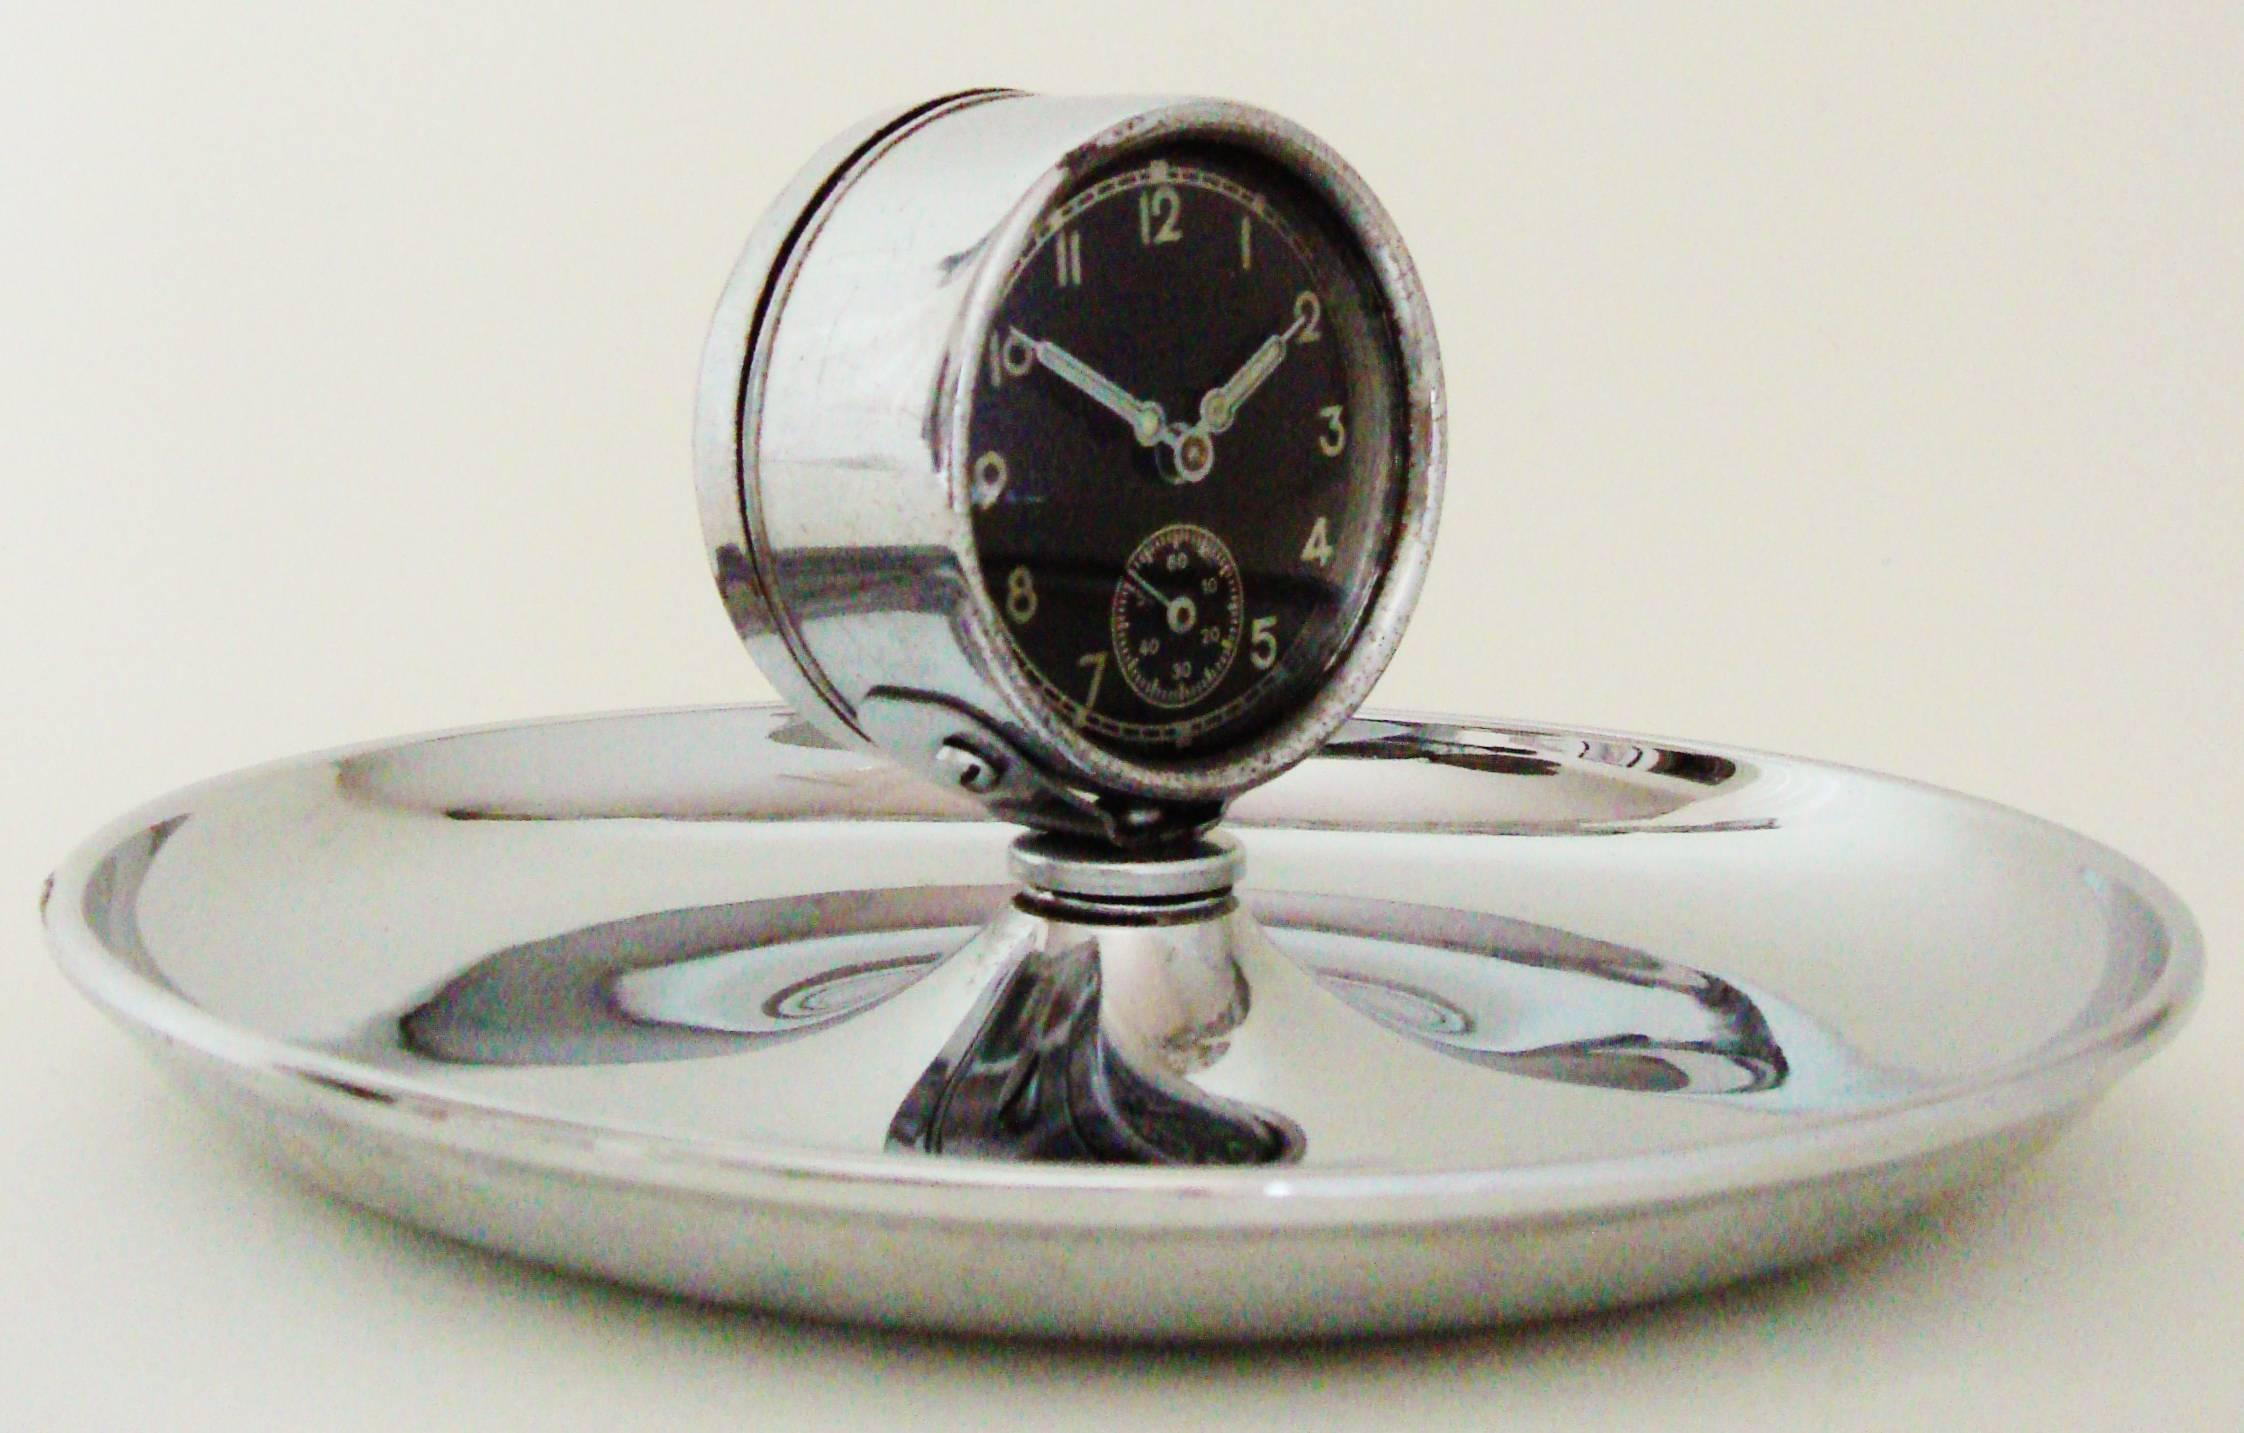 This unusual German Art Deco chrome cigar ashtray features a circular chrome dish with a black-faced 2.13 in diameter mechanical clock mounted to the center. This piece displays beautifully with the dish in excellent condition and the clock itself